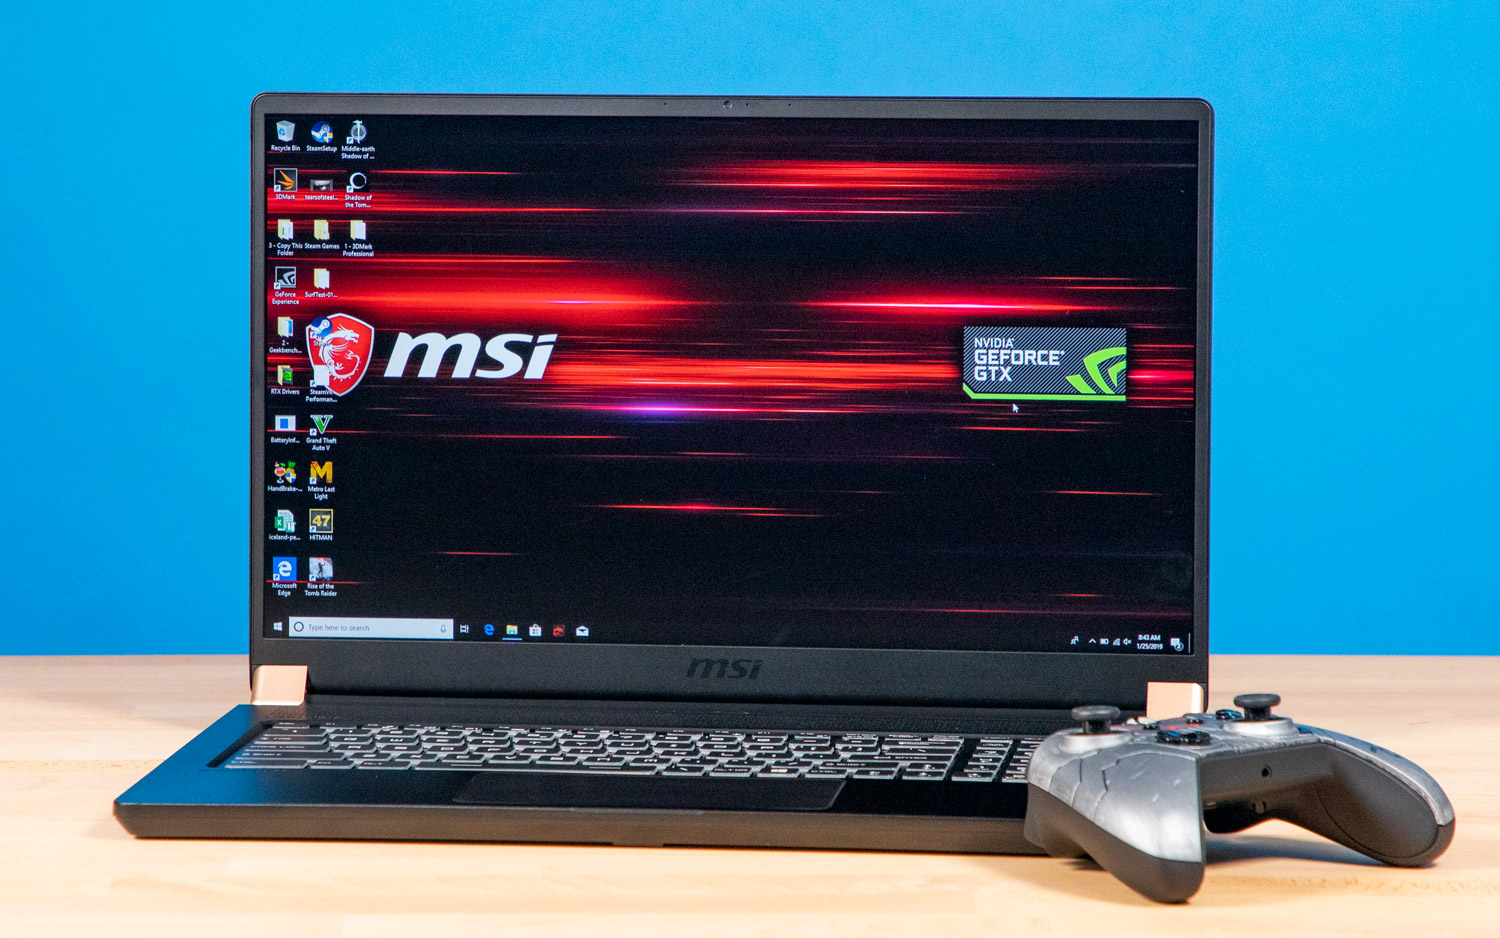 The Complete Guide to Gt20ge223 Gaming Laptops